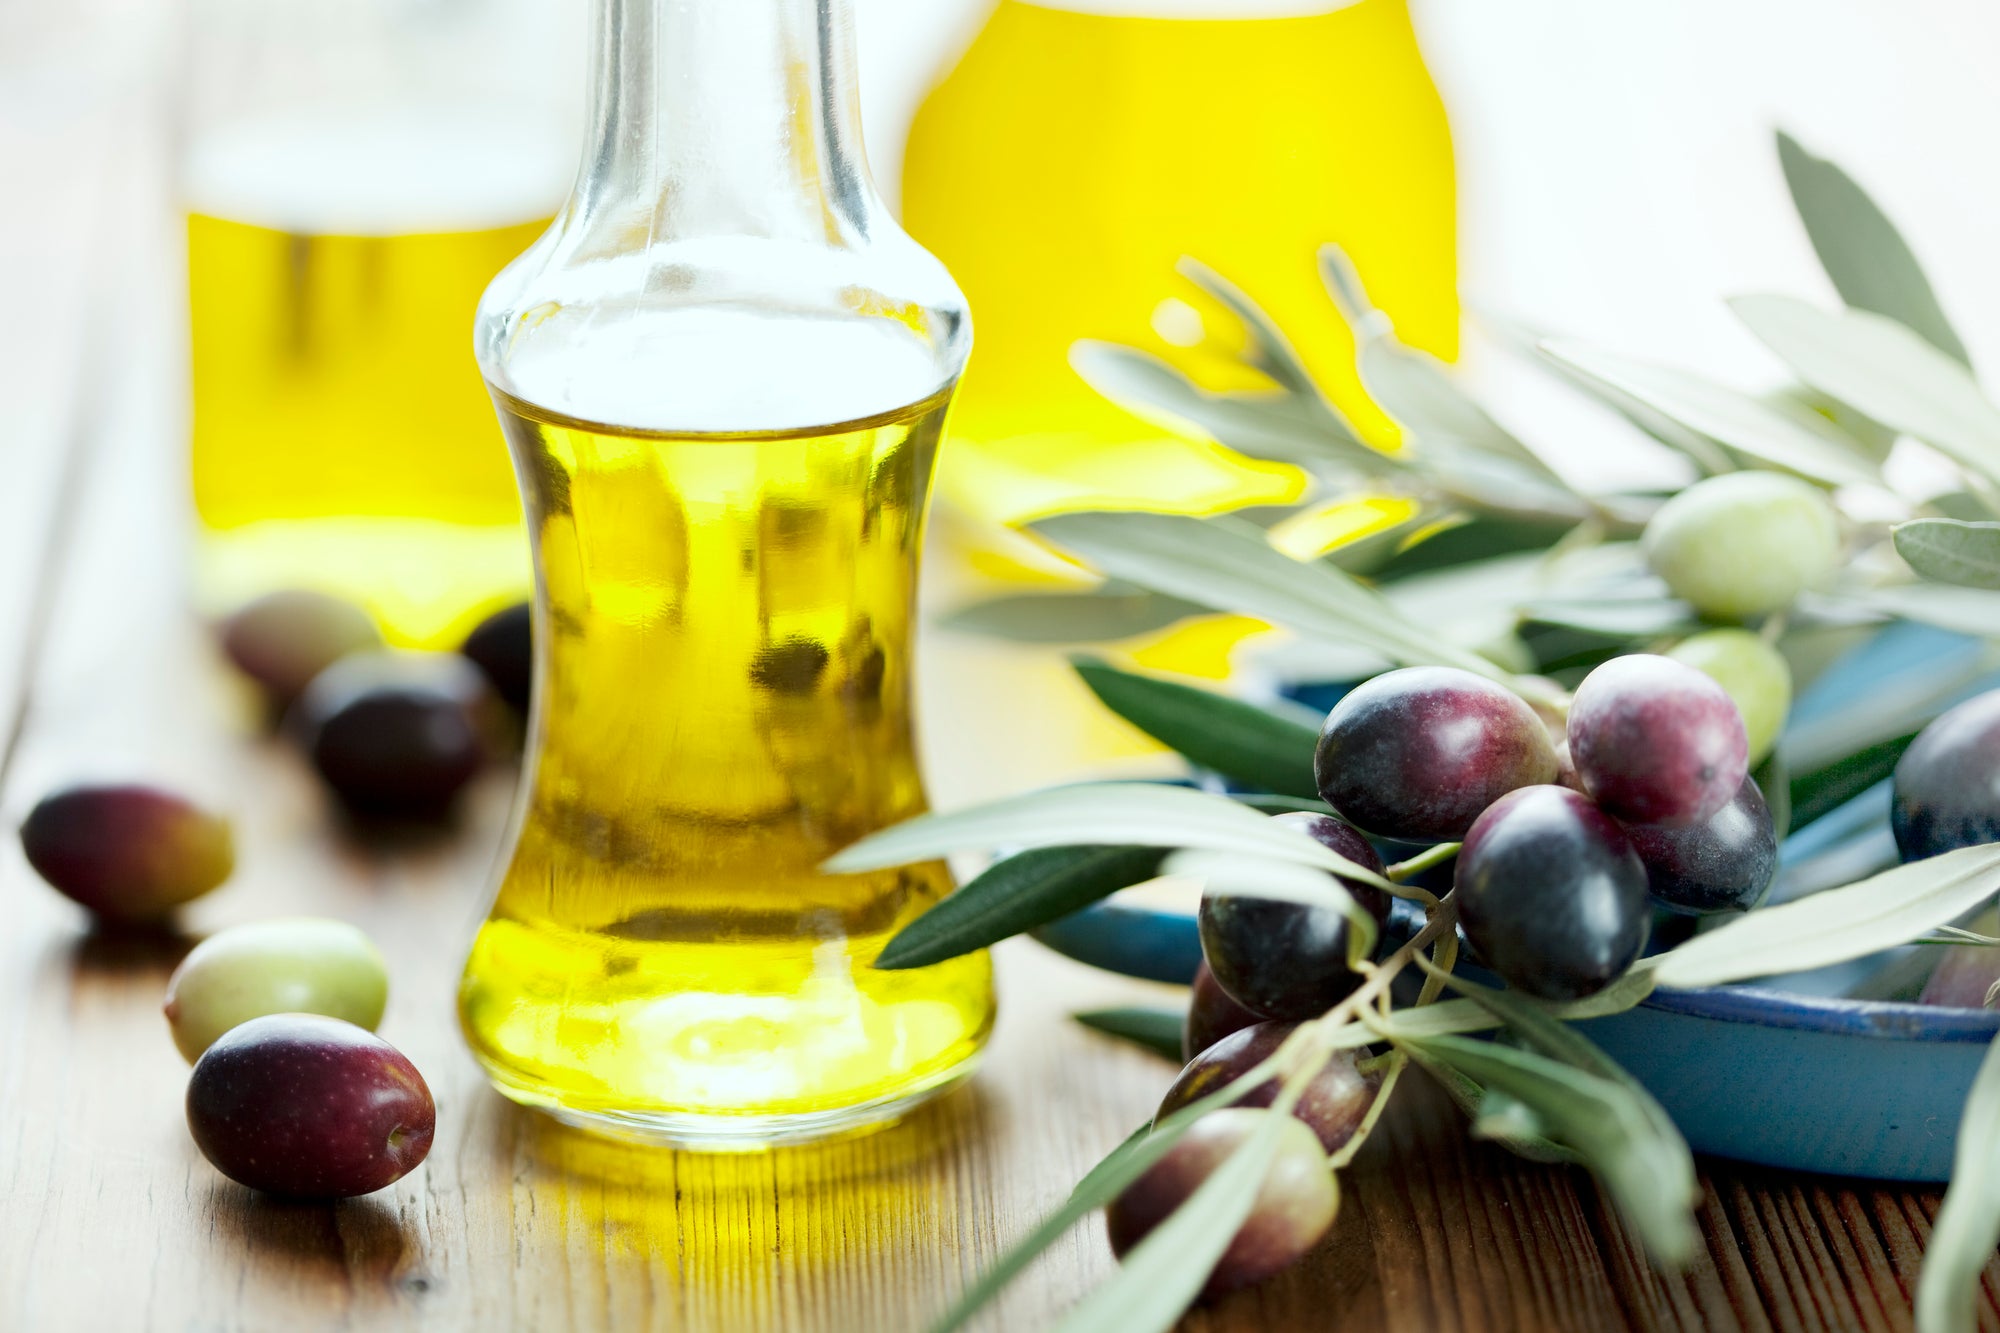 Best Oils for Beards: What are the Benefits of Using Olive Oil for Beard Care?